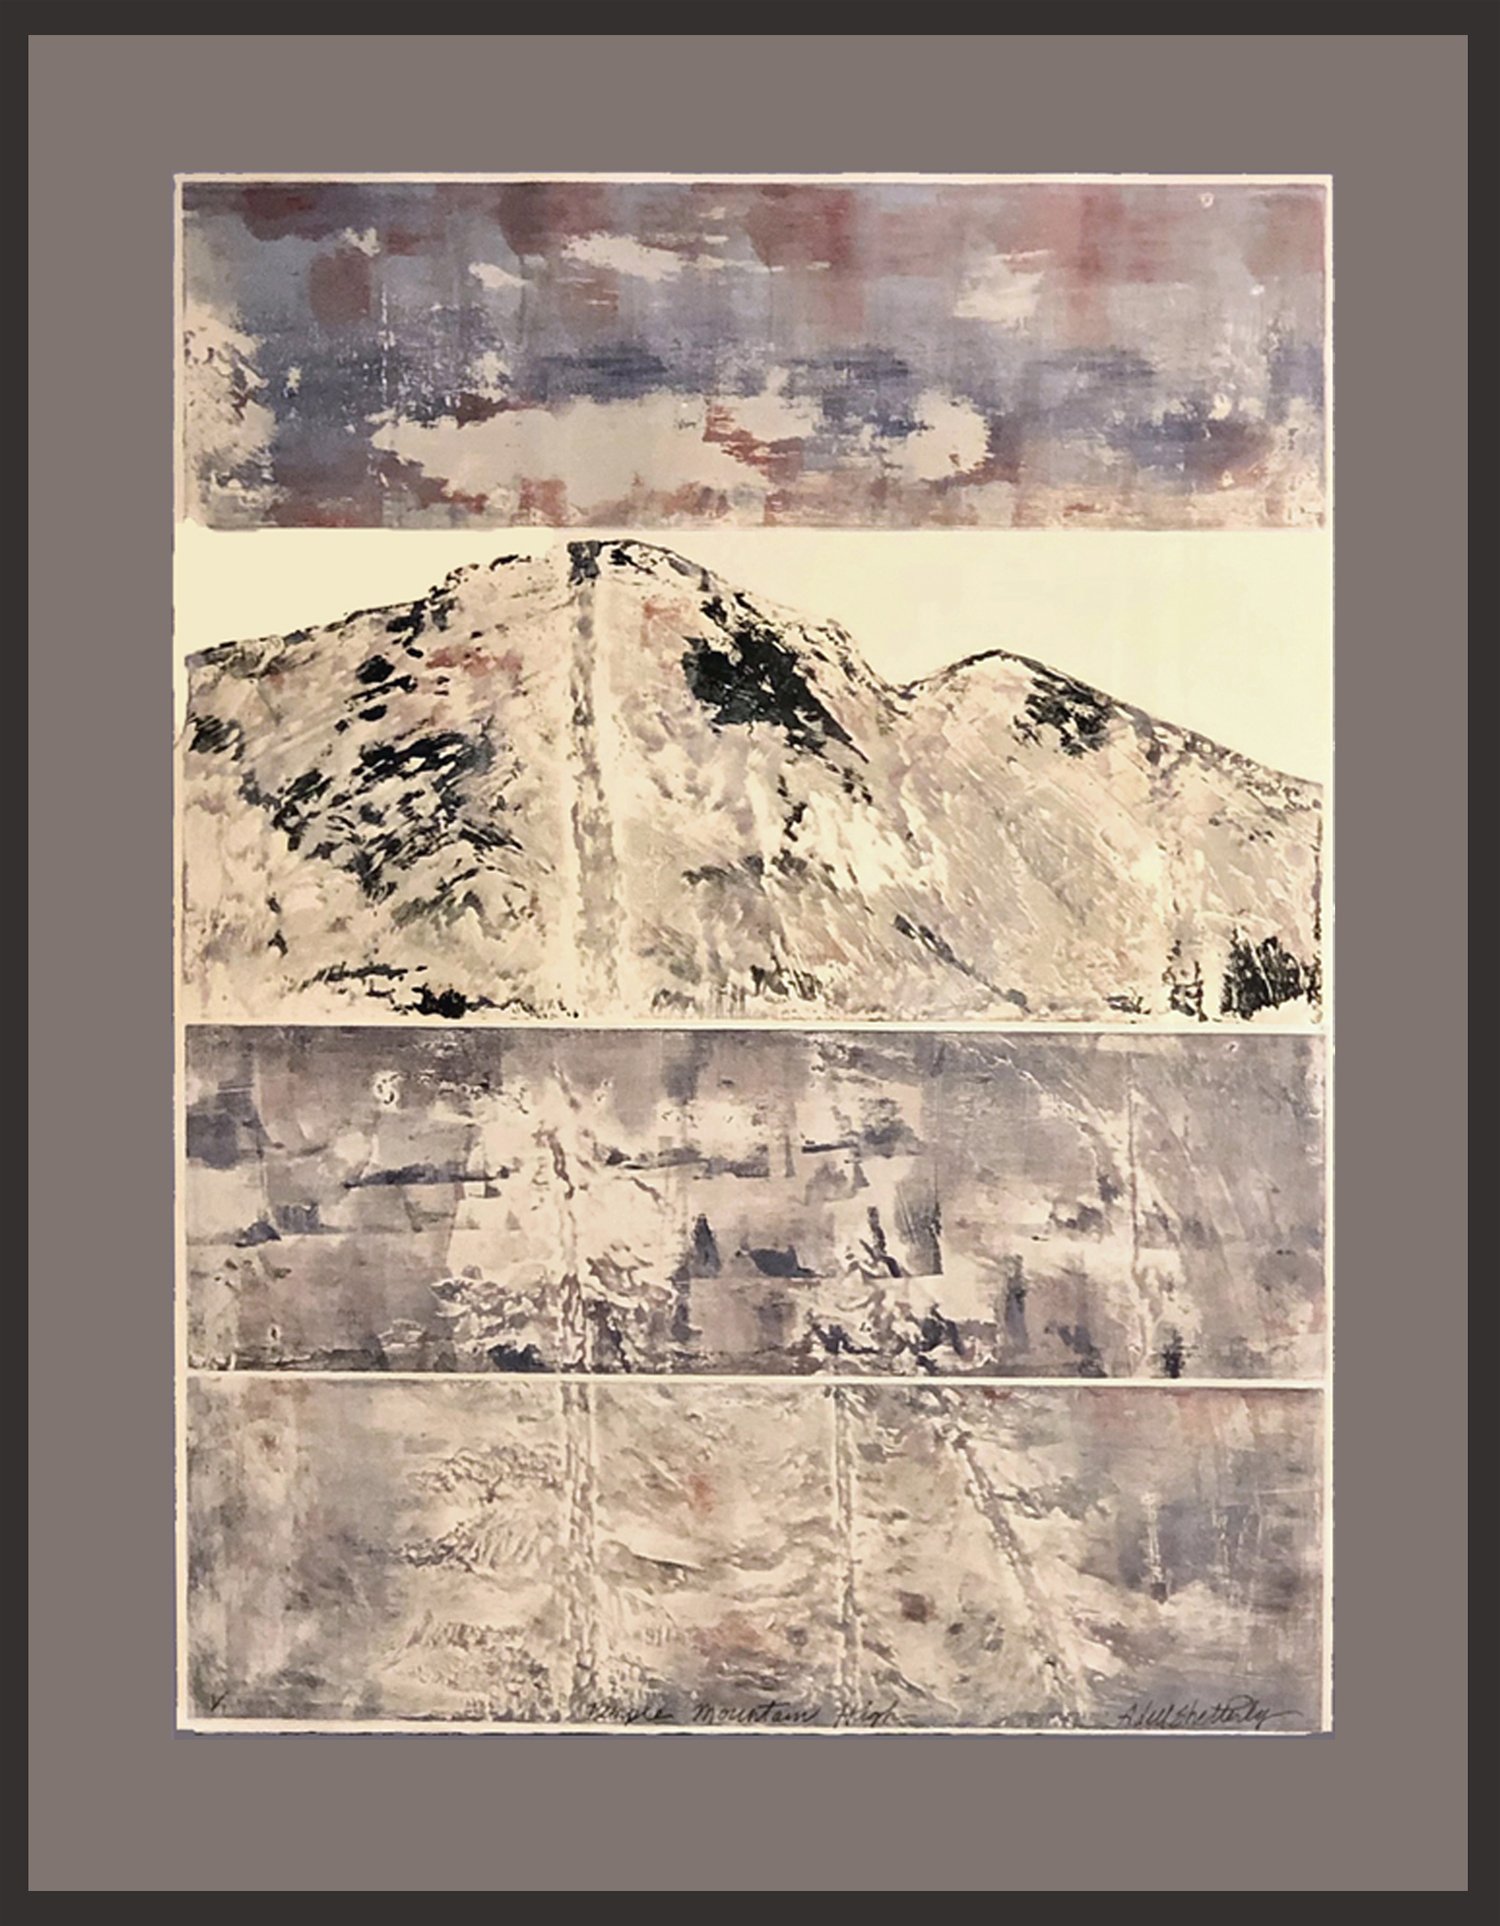    Purple Mountain High  . Mountains glow while enveloped in colors of the morning sunrise. 4 plate collagraph. Floated and framed, 30.5 x 22 .5 inches. On cream BFK Lightweight. 1/1   SOLD  